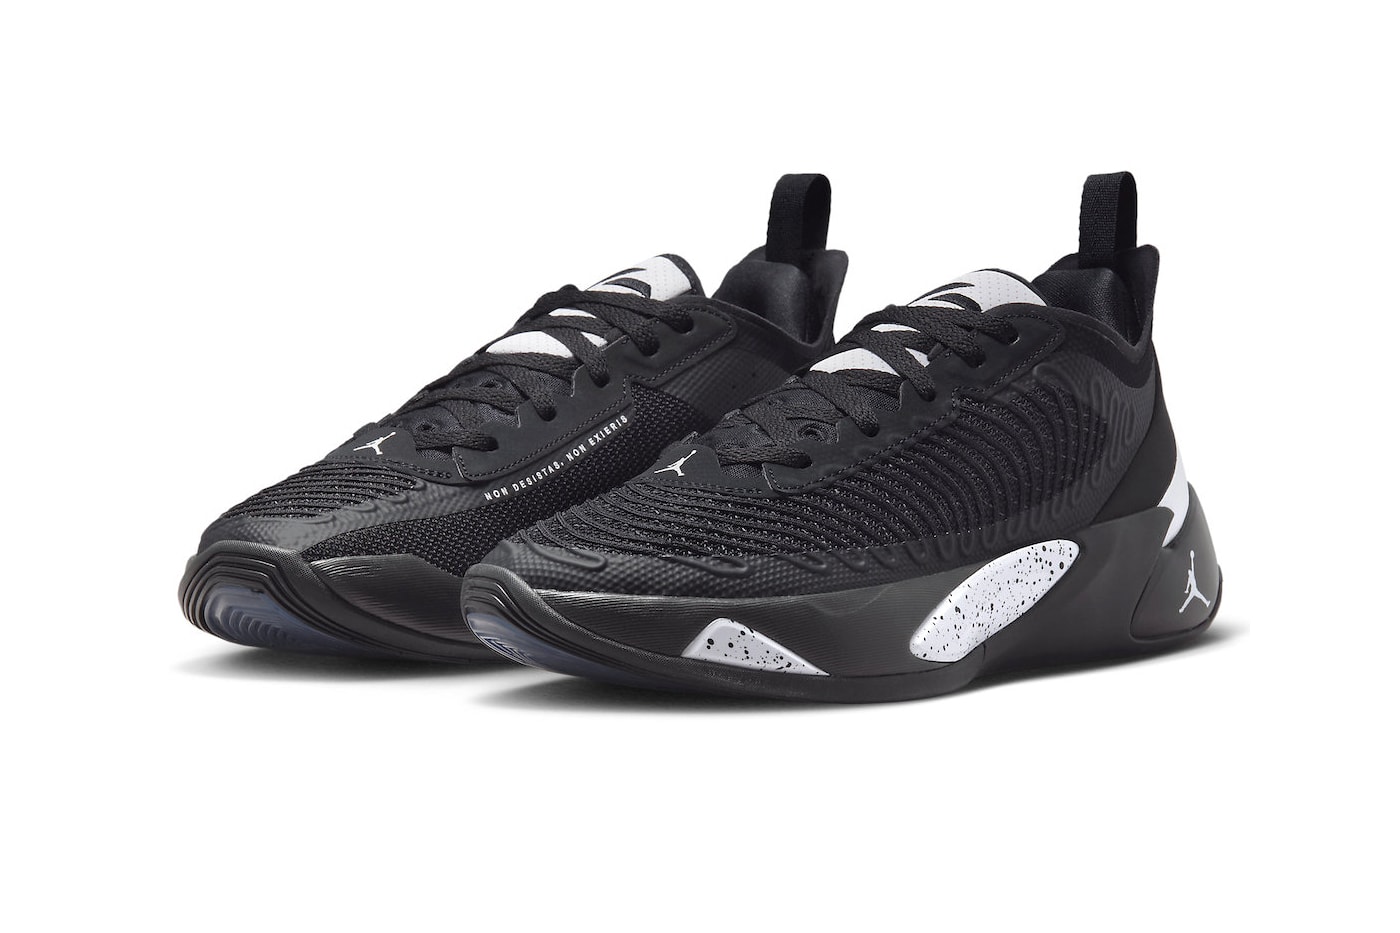 JORDAN LUKA 1 OREO Doncic first look black white dq7689 001 formula23 release info date price